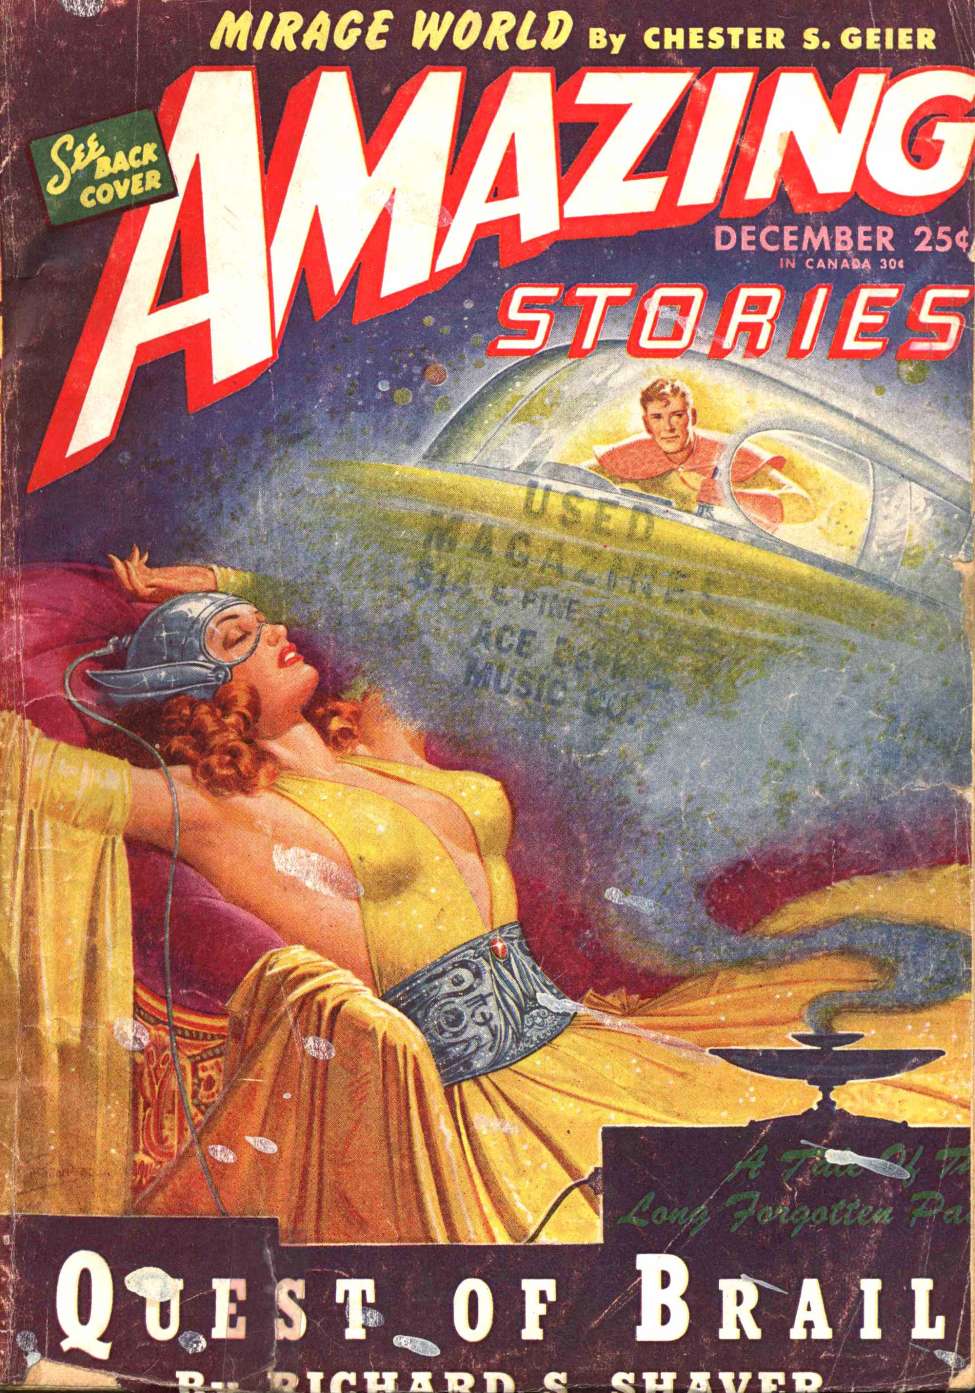 Comic Book Cover For Amazing Stories v19 4 - Quest of Brail - Richard S. Shaver